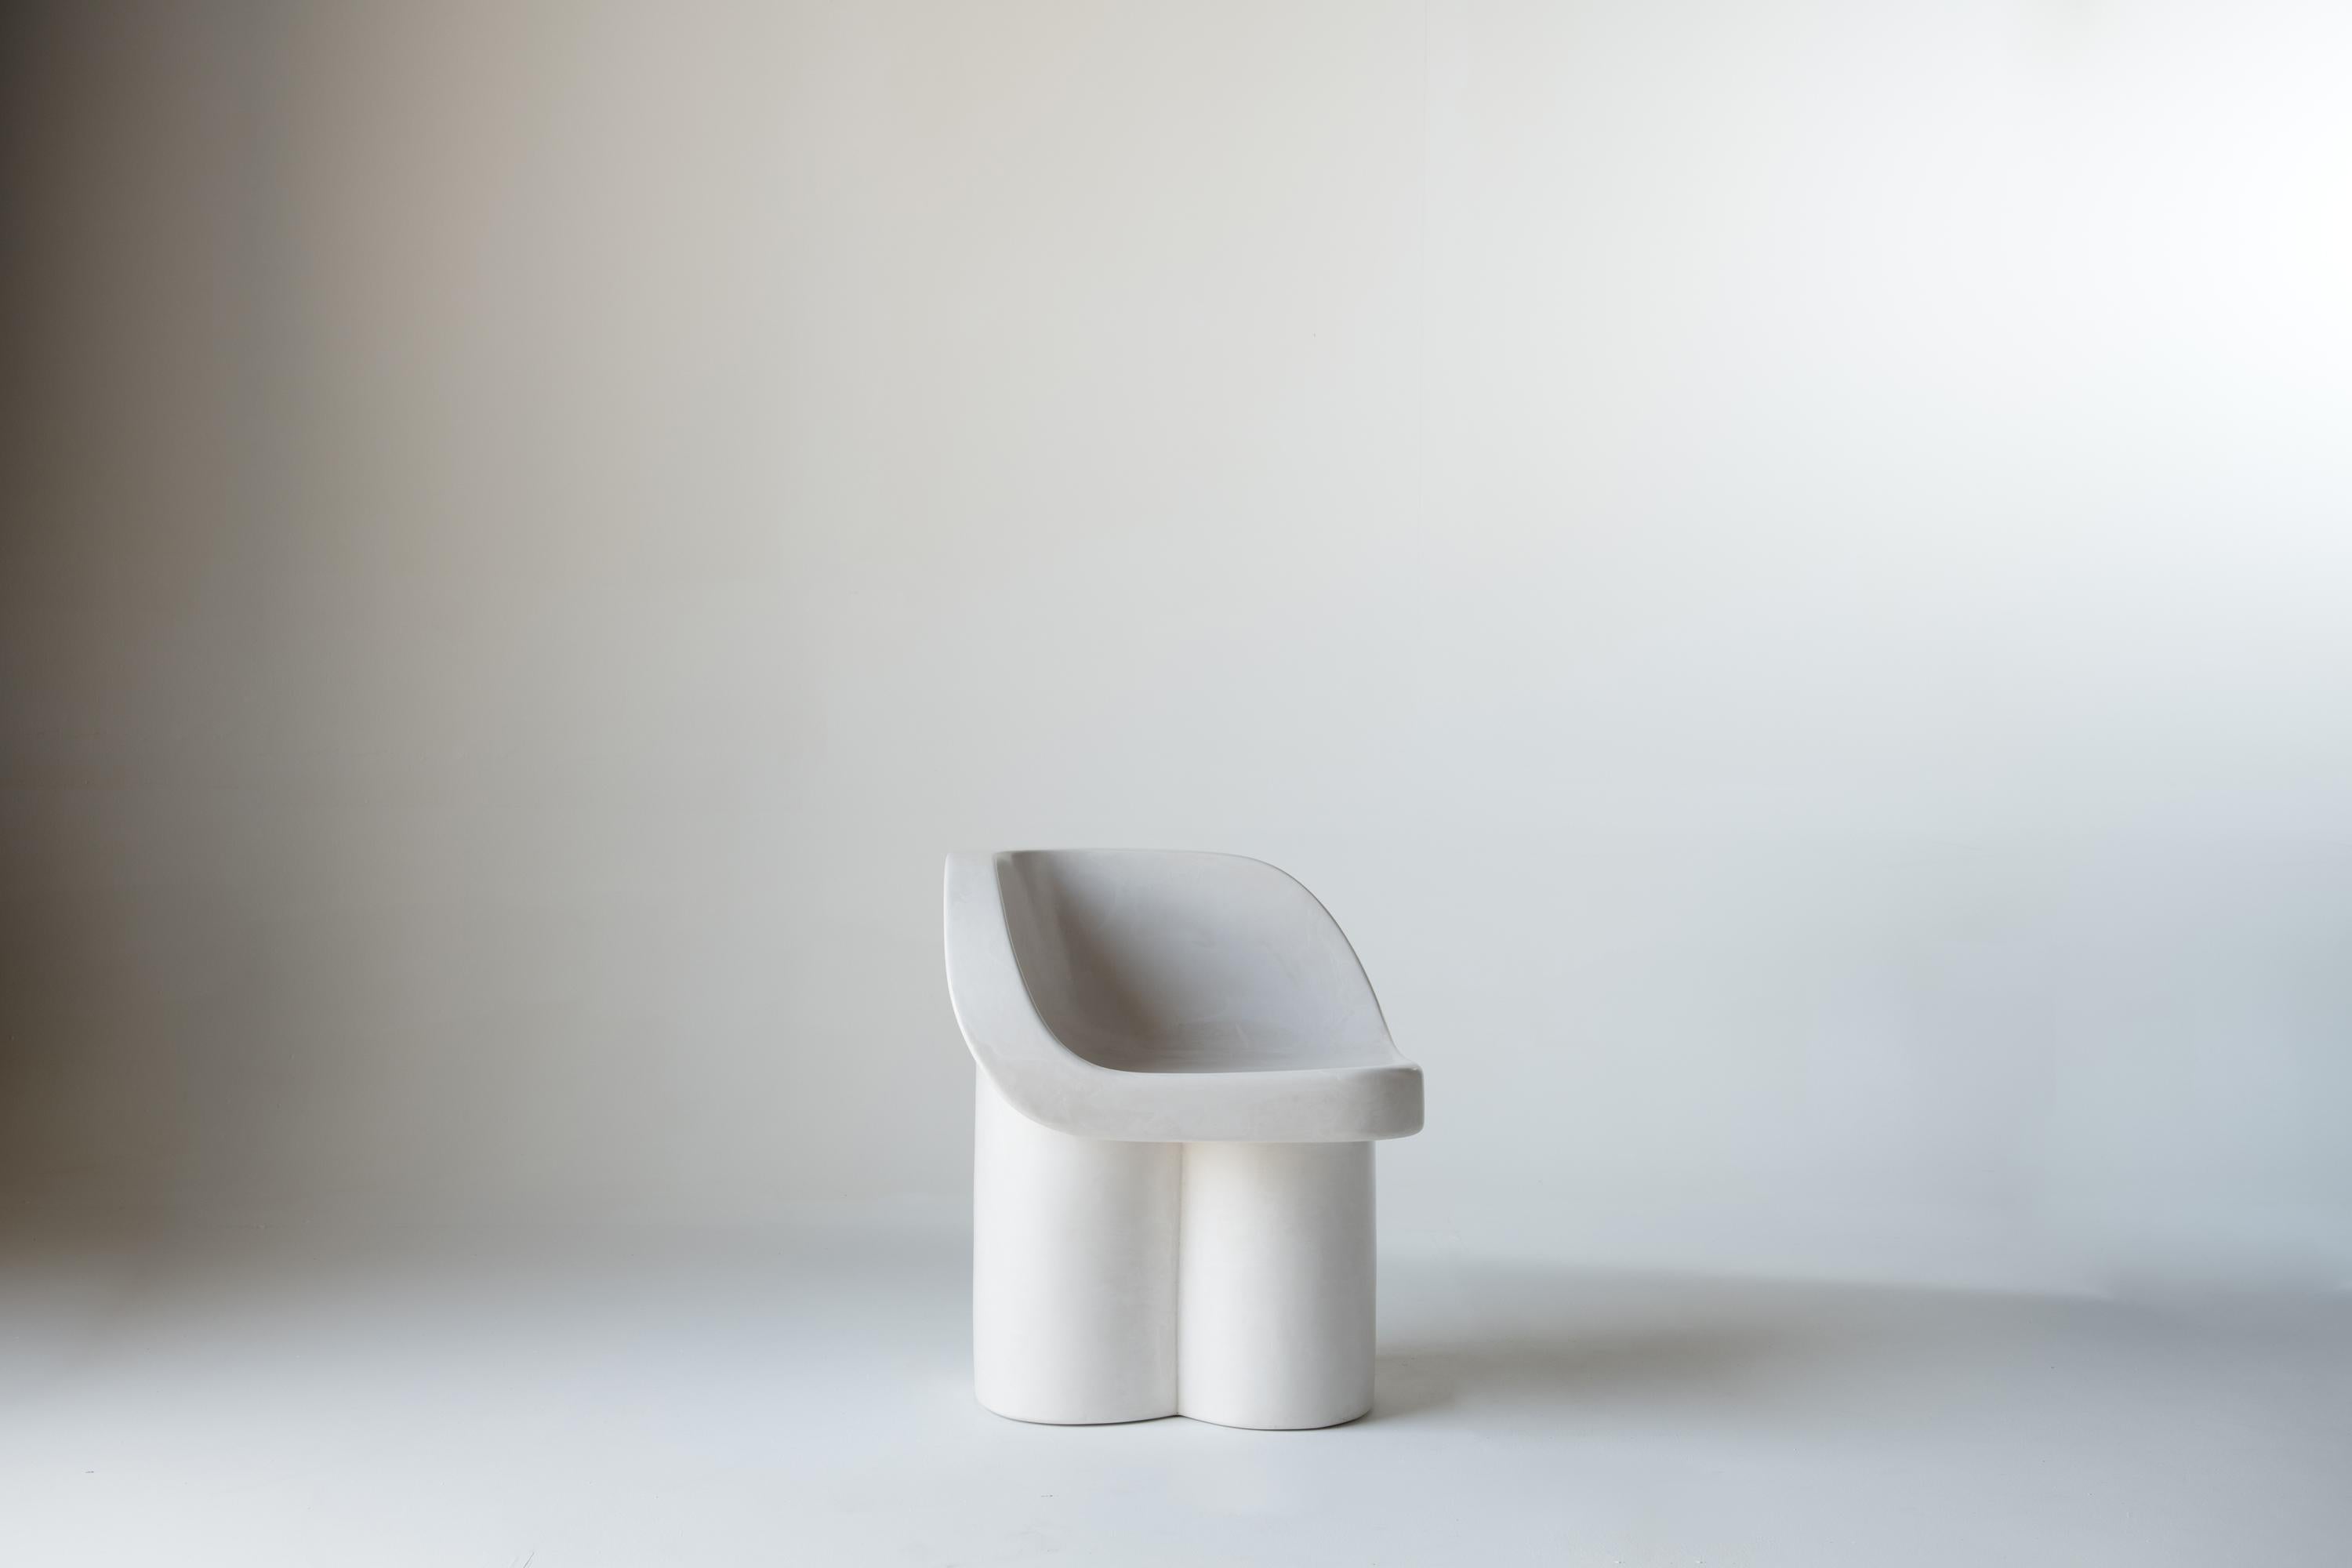 Le Petit elephant chair is hand carved from gypsum plaster and polished with the sensitivity and attention of a sculptor. Having been carved by hand, the surface contains a pleasing subtlety.